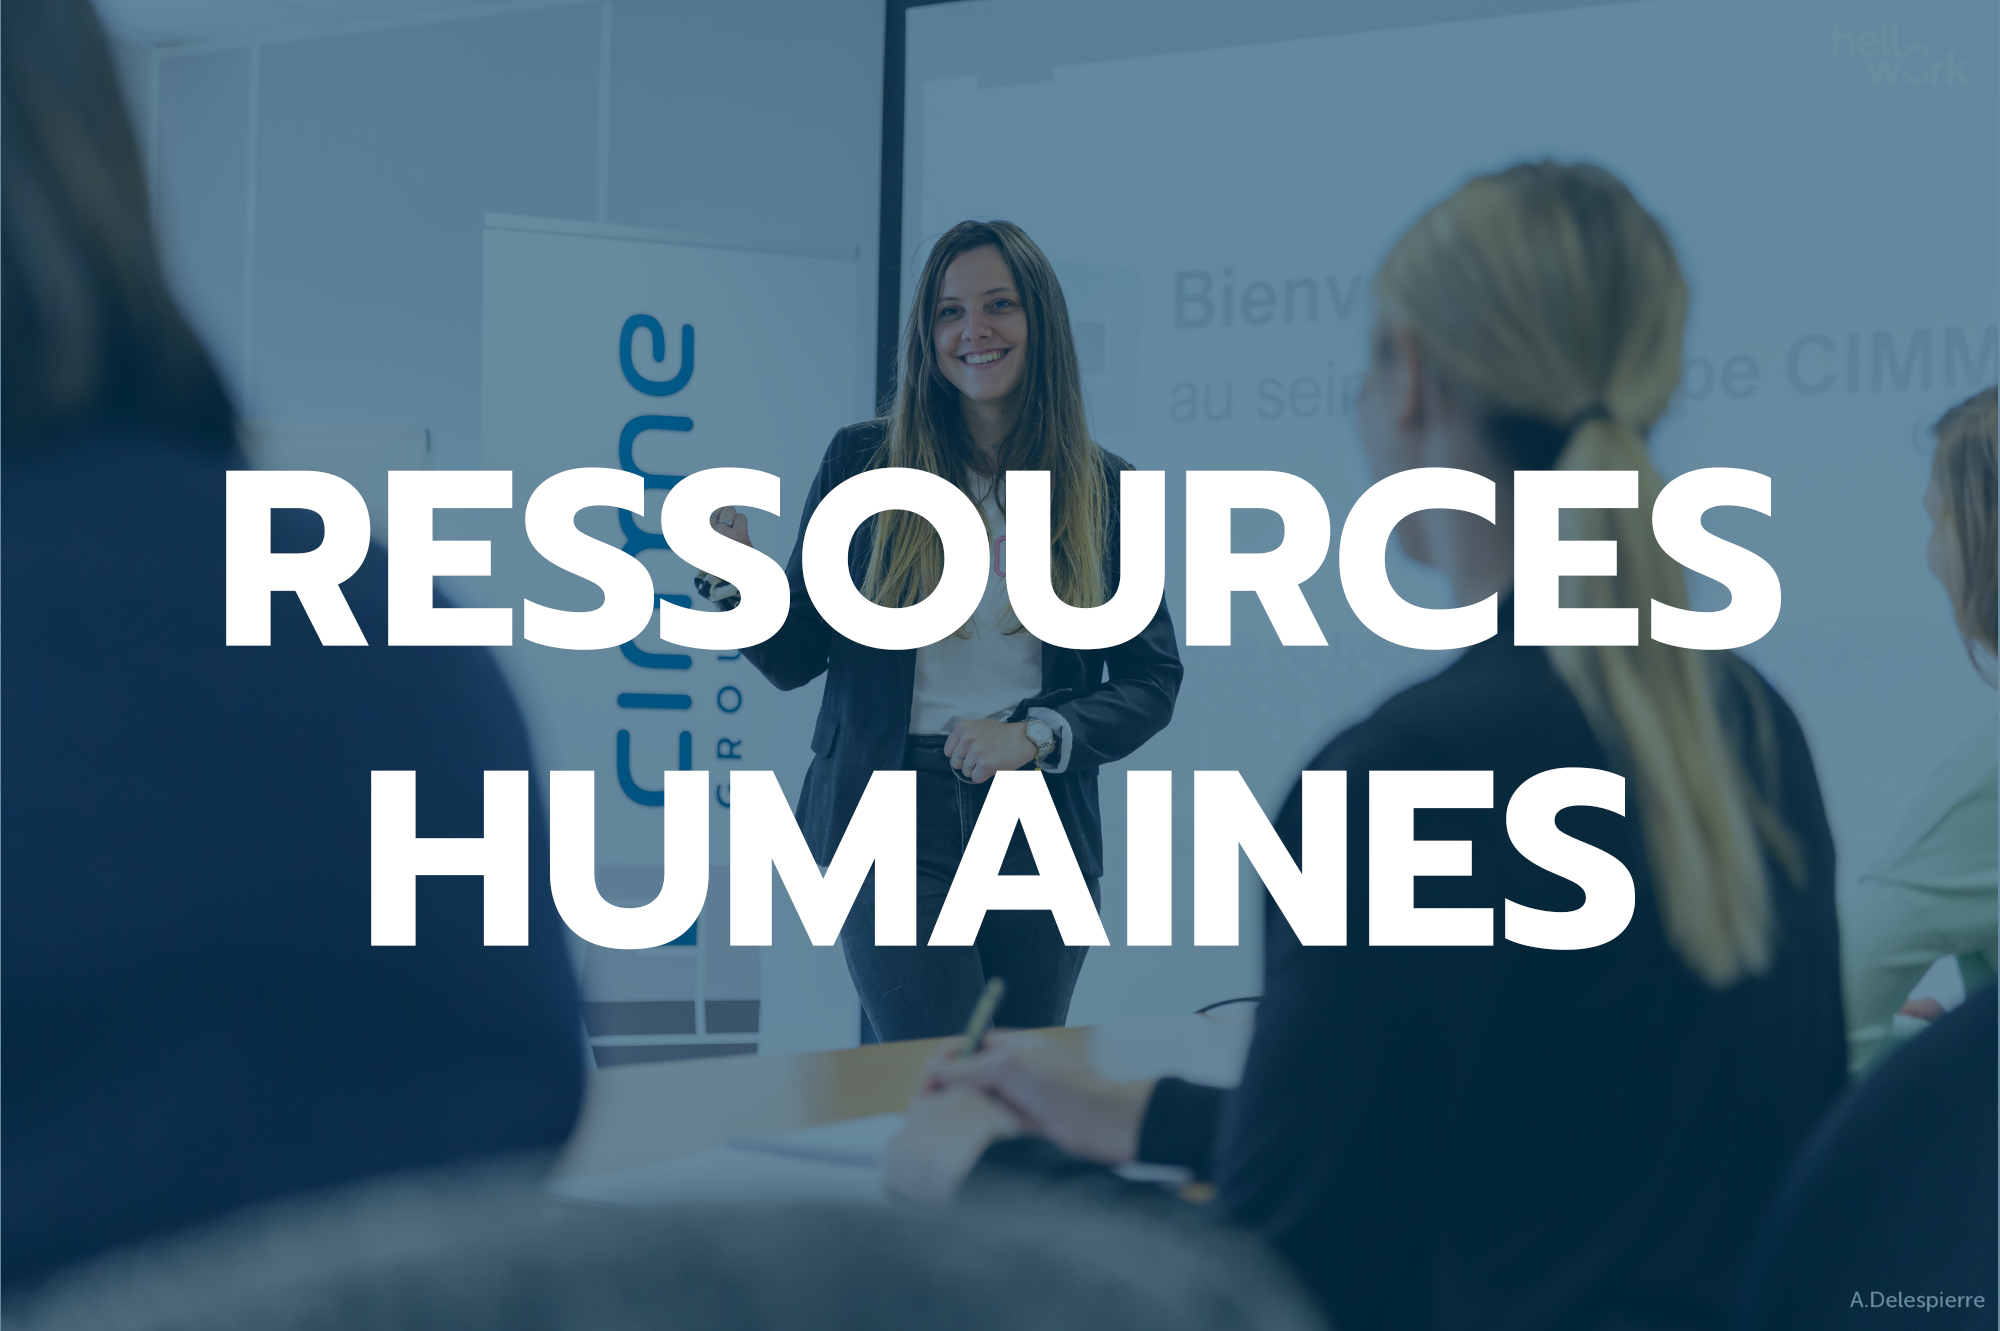 ressources humaines